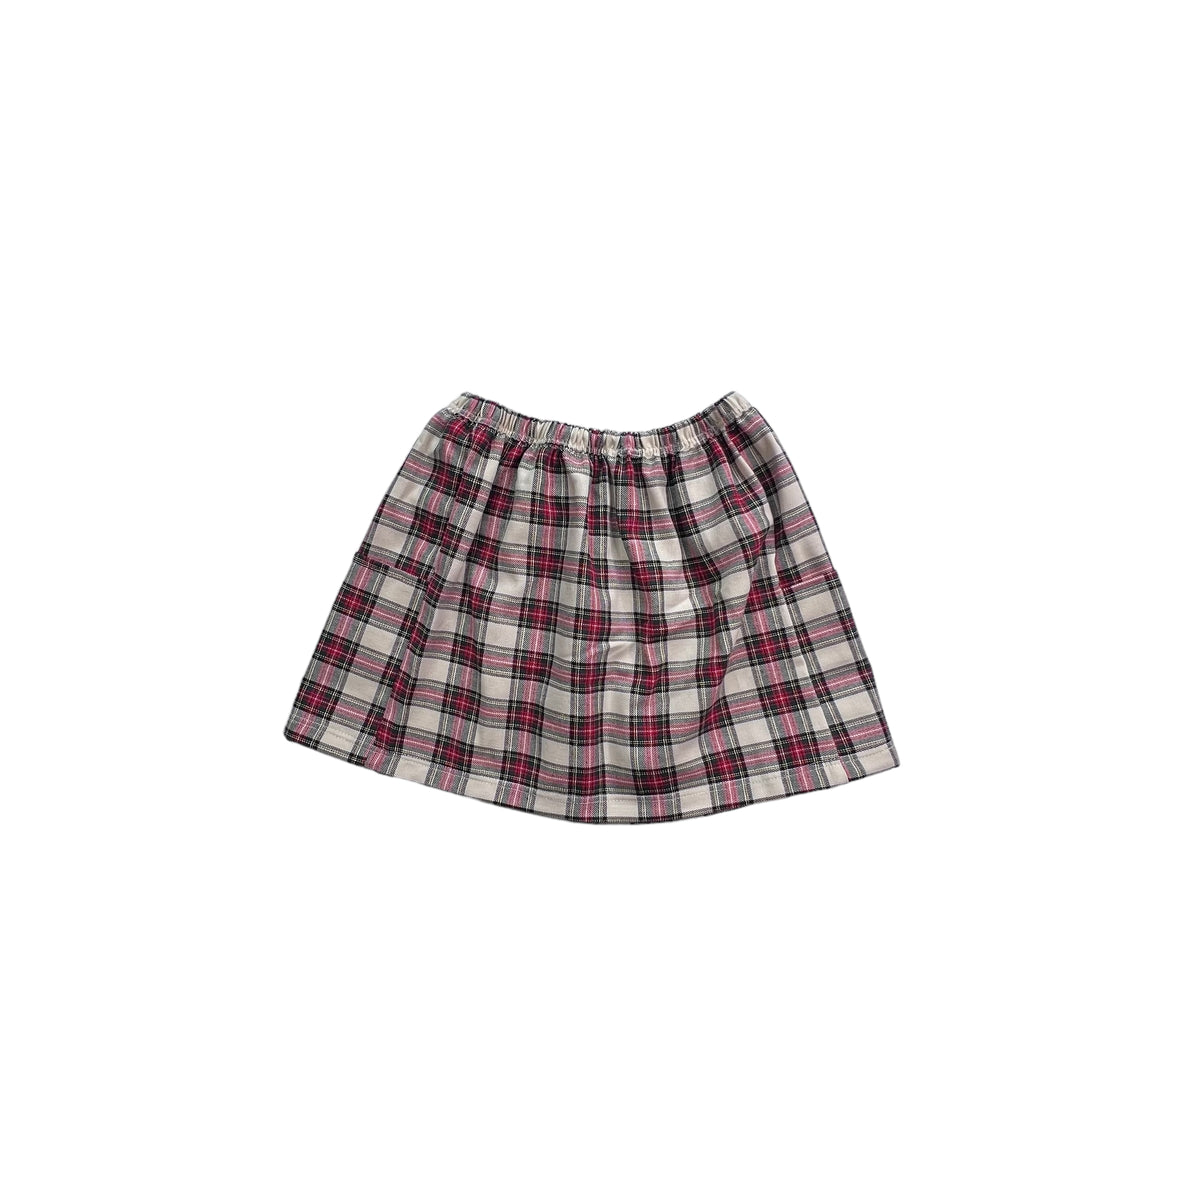 Christiana Skirt in 'Milk and Cookies Plaid' - Ready To Ship